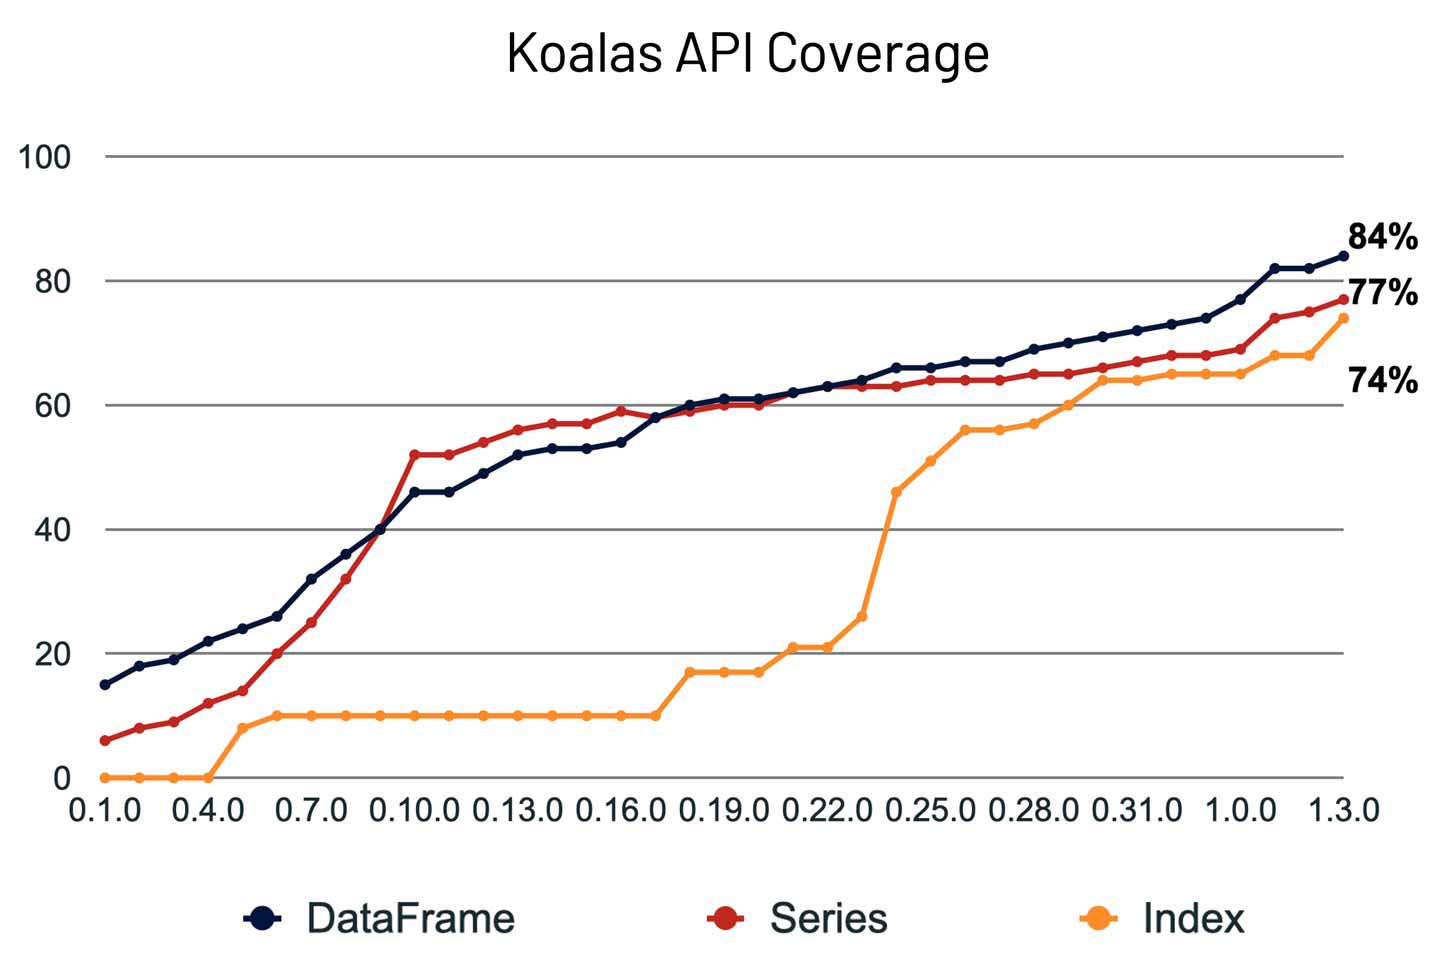 The growth of Koalas’ API coverage over 2020.